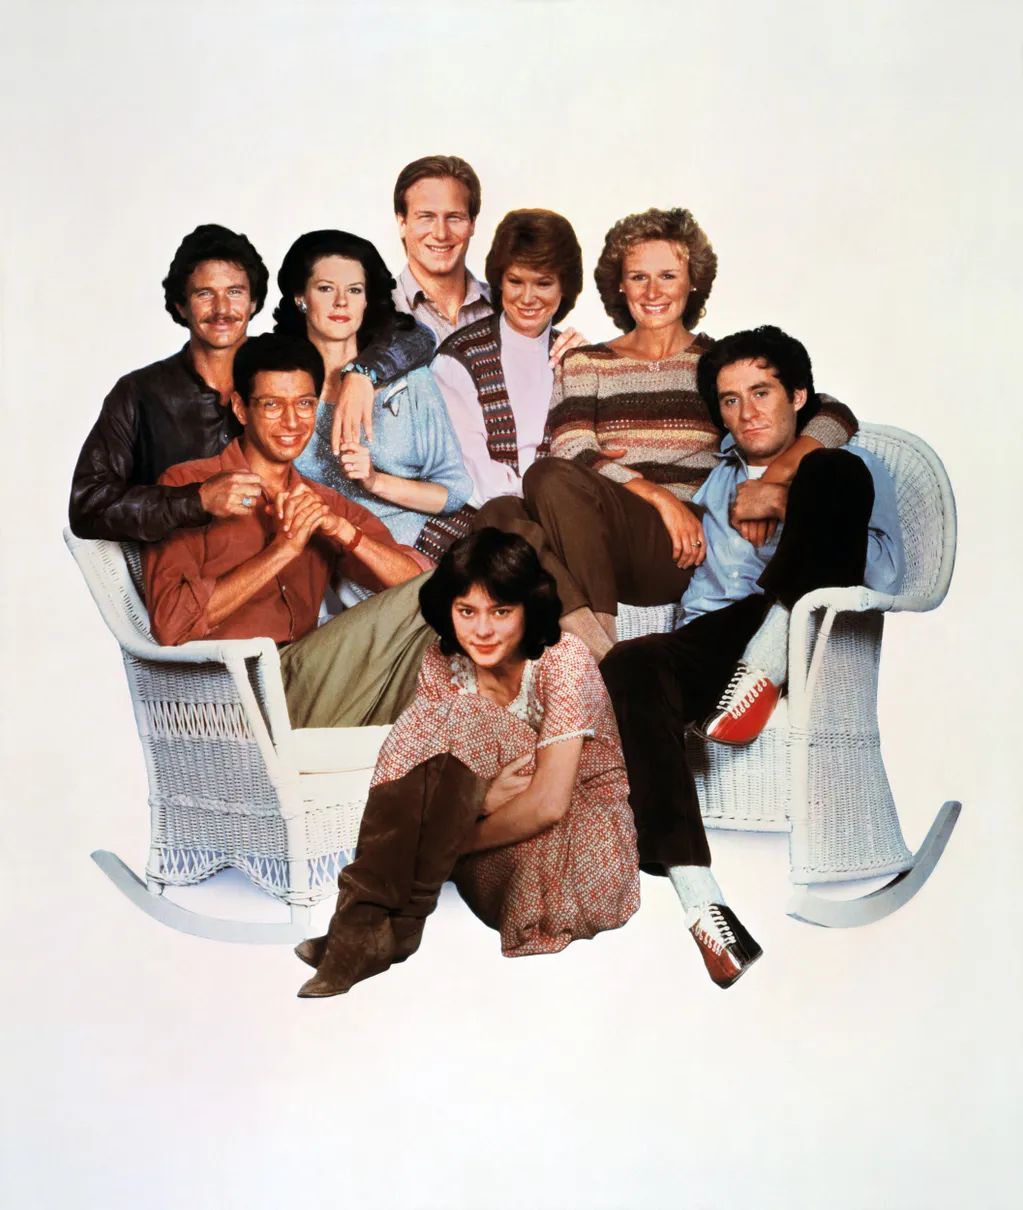 LES COPAINS D'ABORD - THE BIG CHILL (1983) Square Vertical 